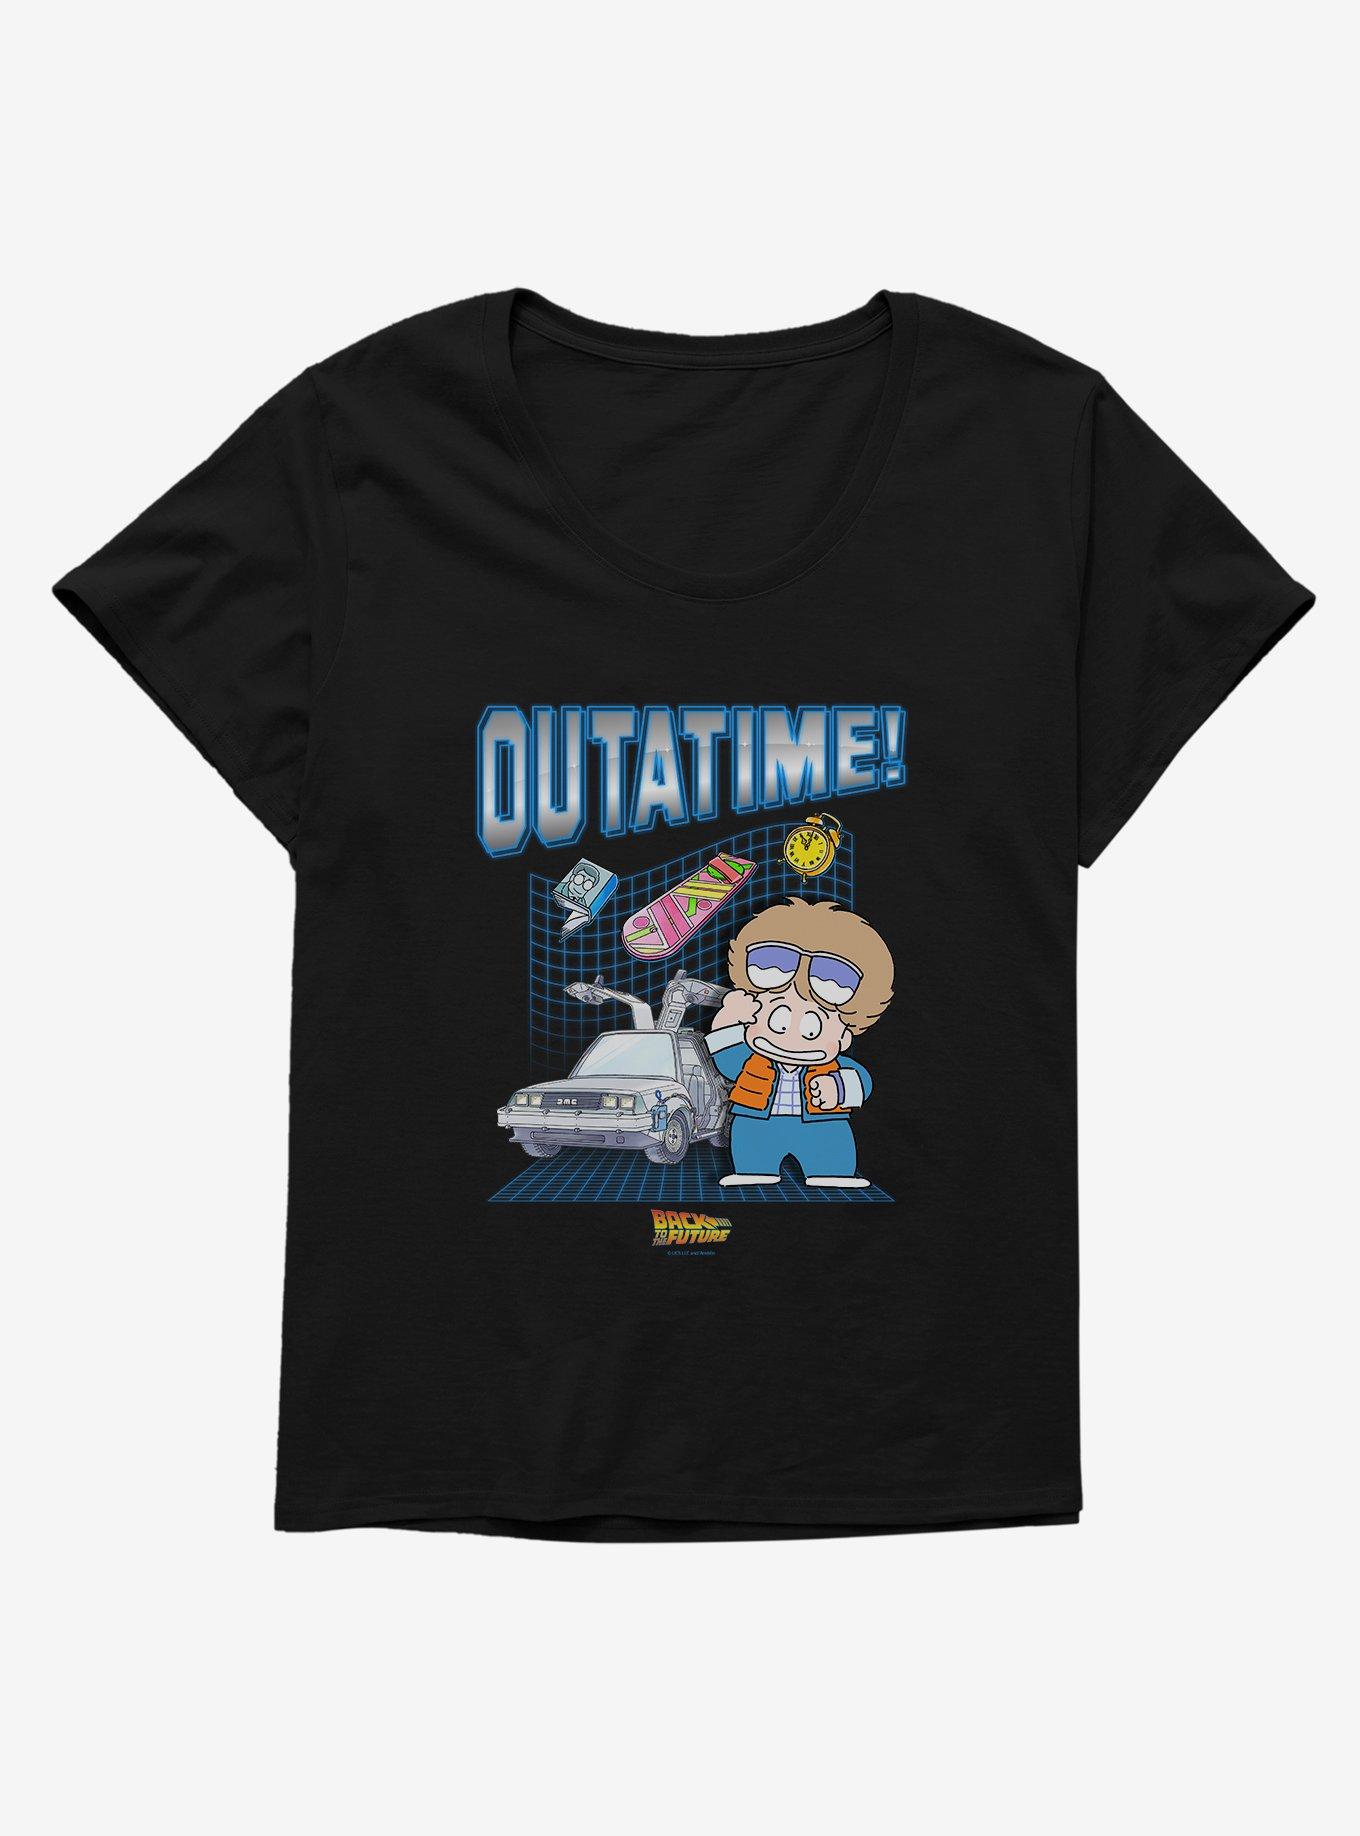 Back To The Future Anime Outatime! Girls T-Shirt Plus